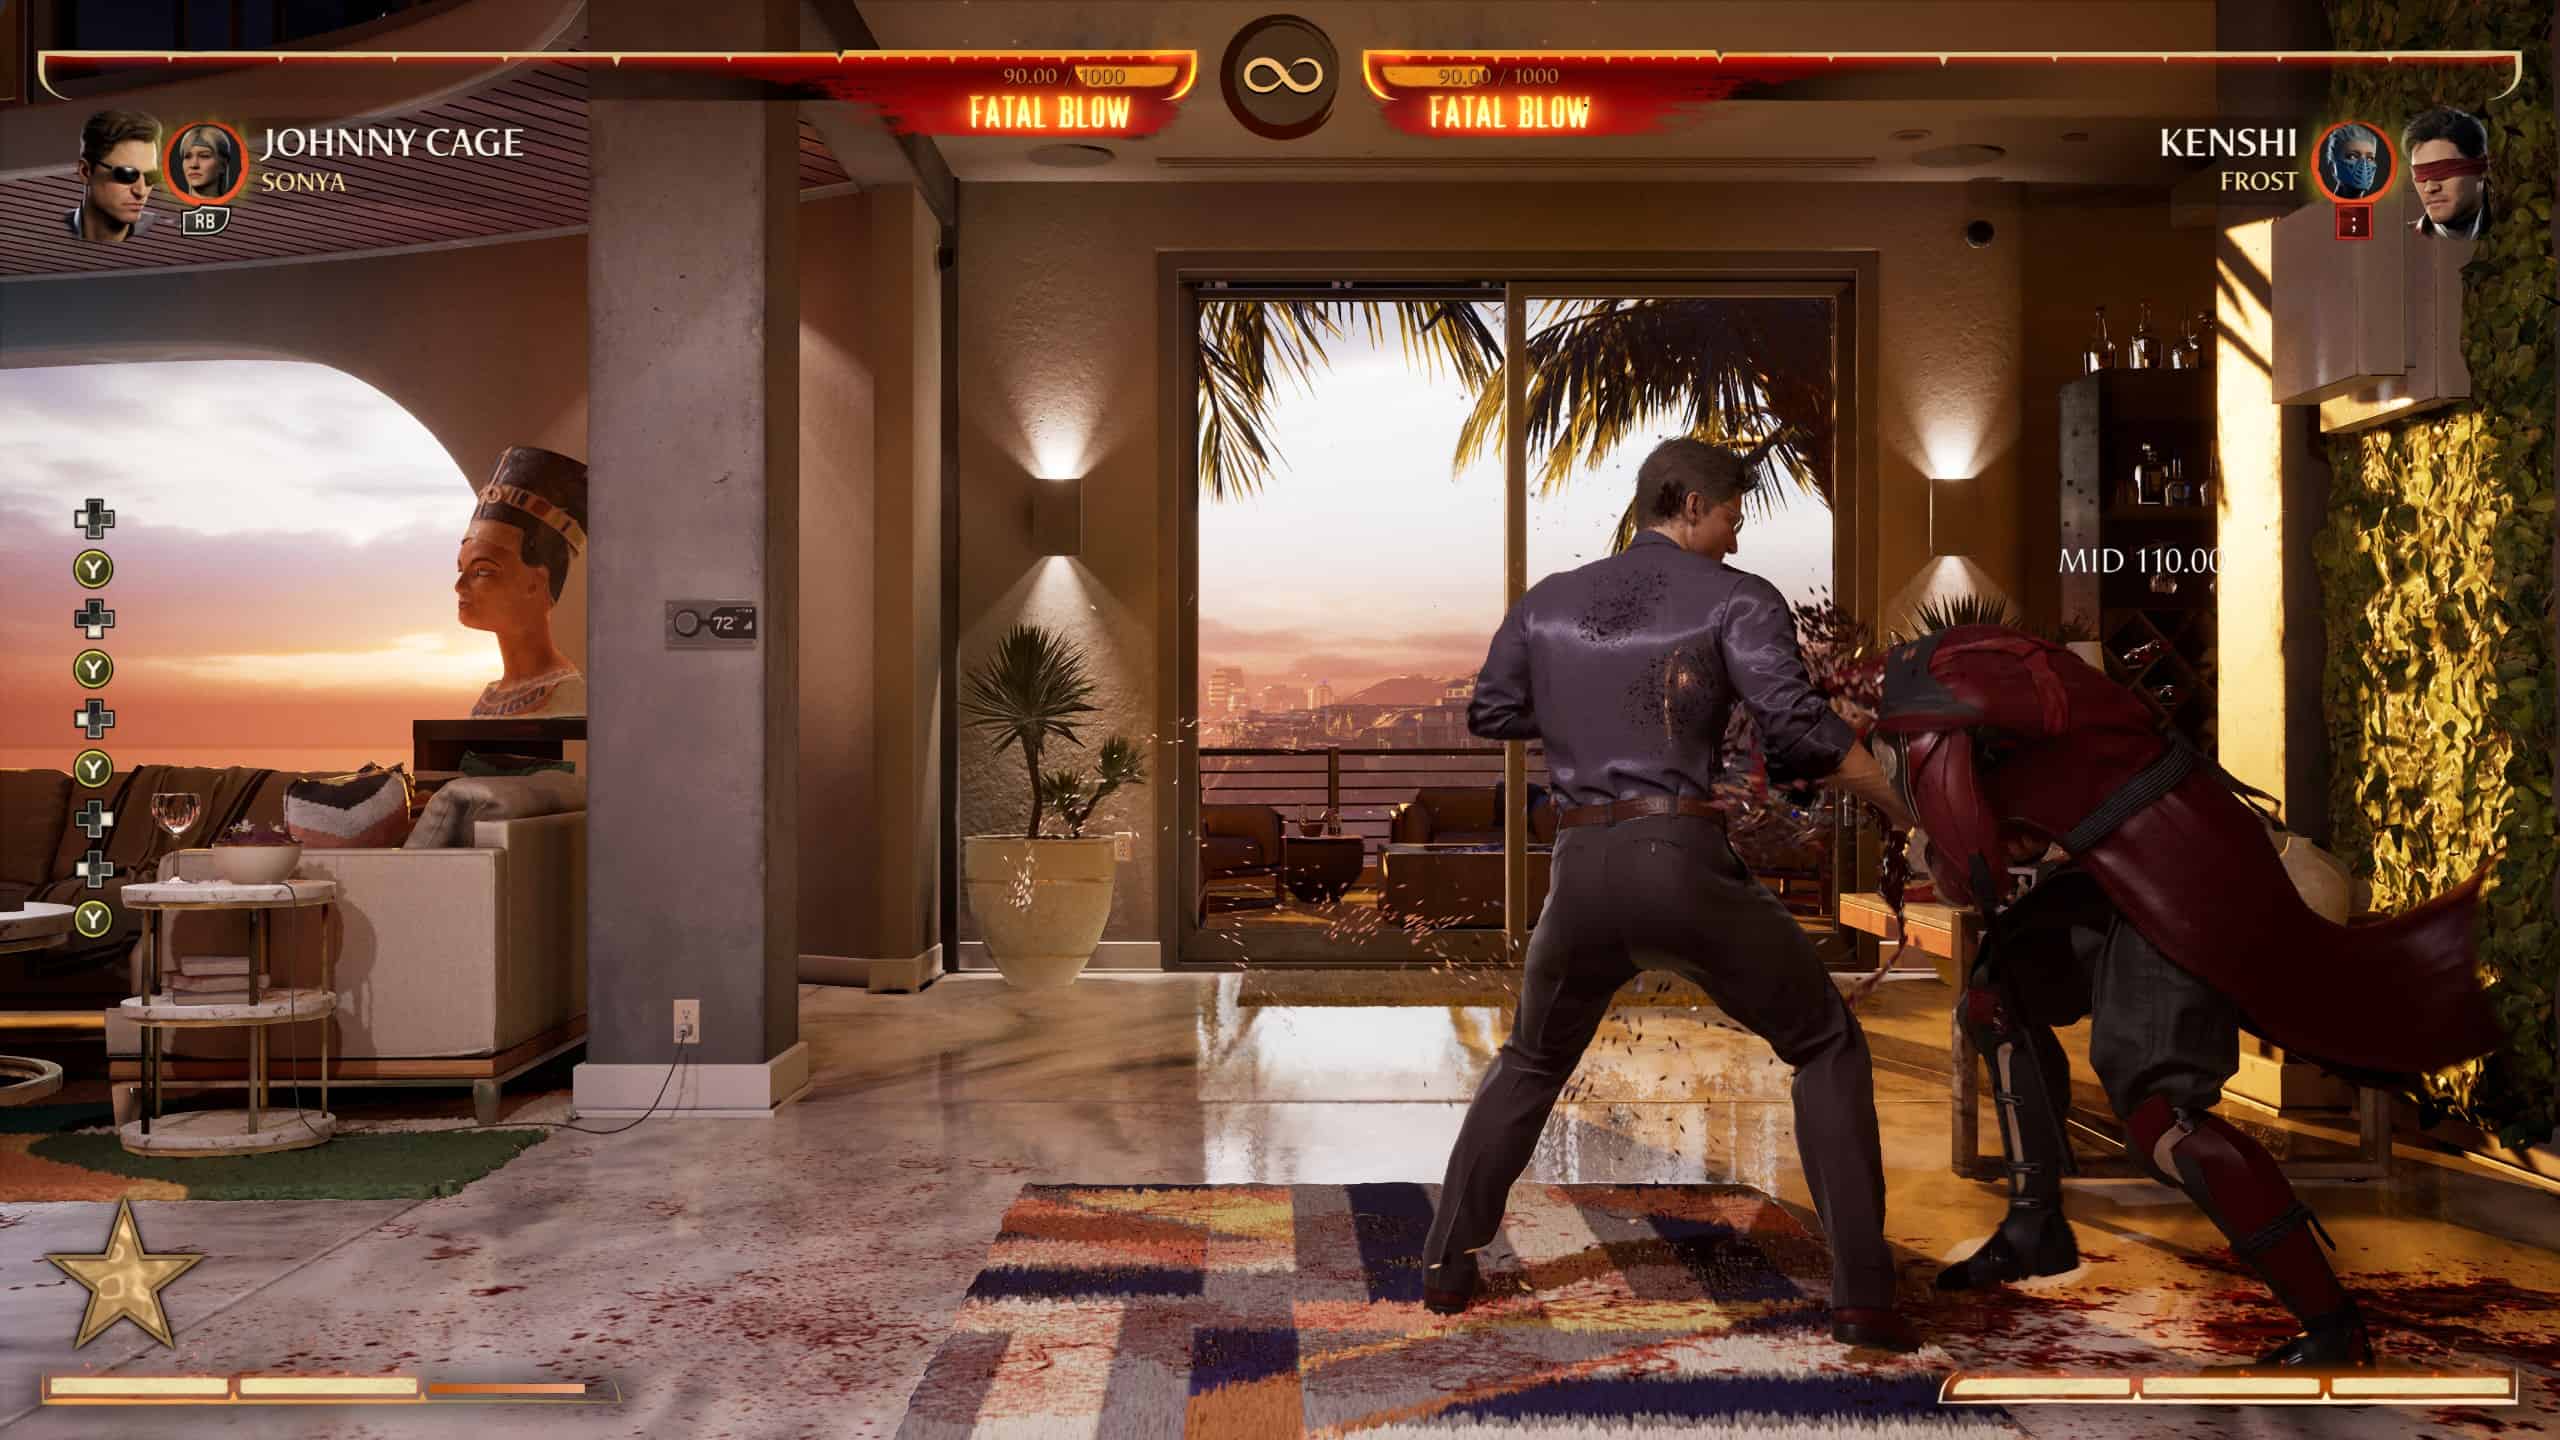 Mortal Kombat 1 Johnny Cage: An image of Johnny Cage fighting Kenshi in his mansion.